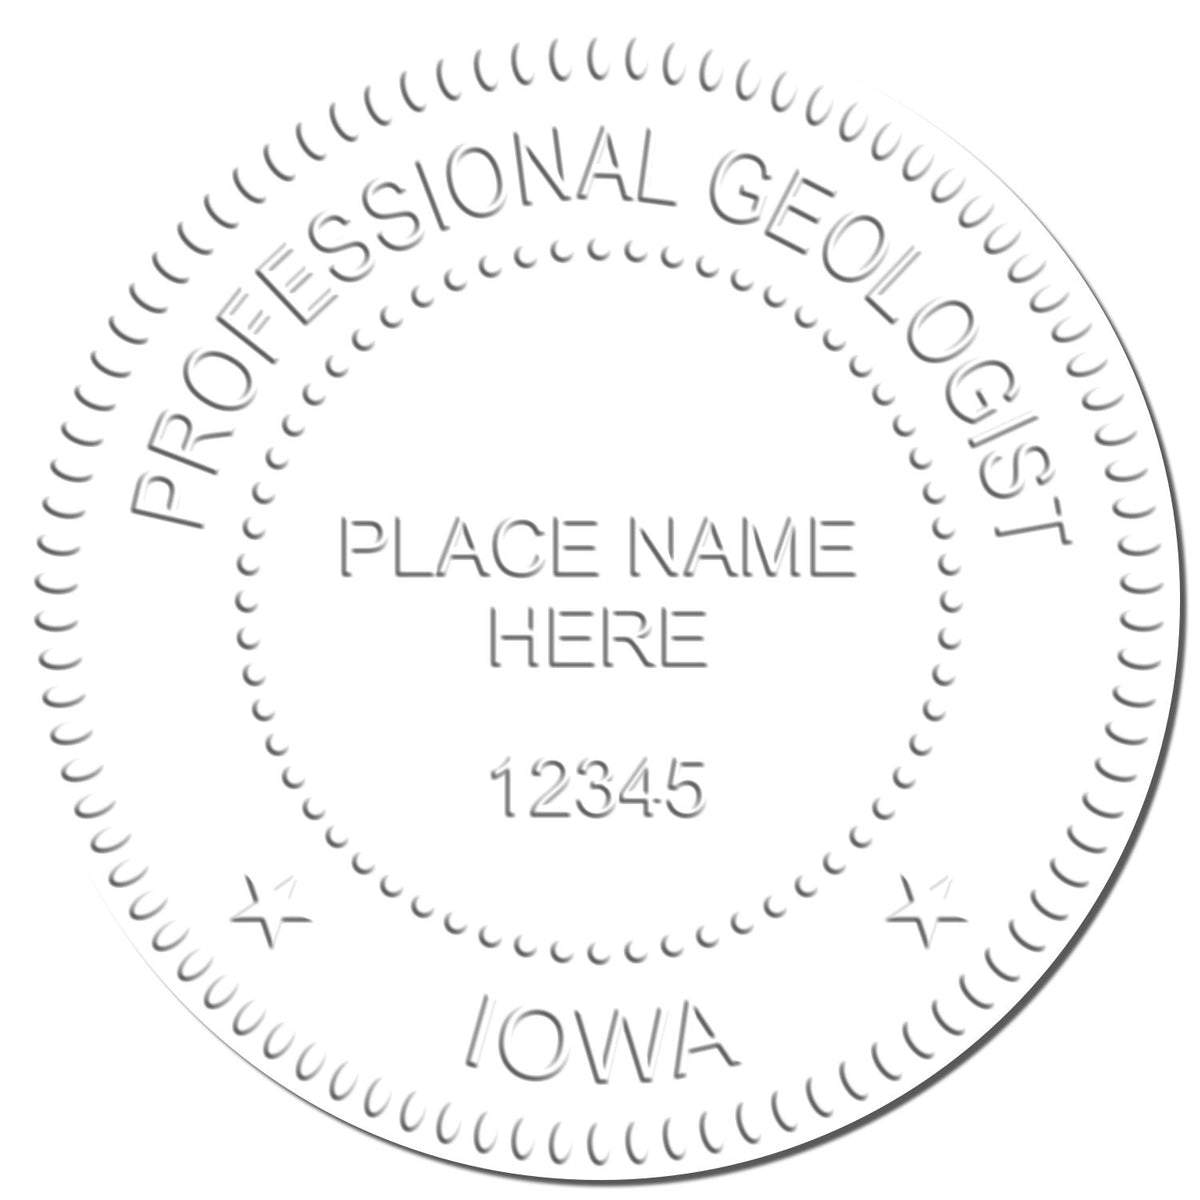 A photograph of the Hybrid Iowa Geologist Seal stamp impression reveals a vivid, professional image of the on paper.